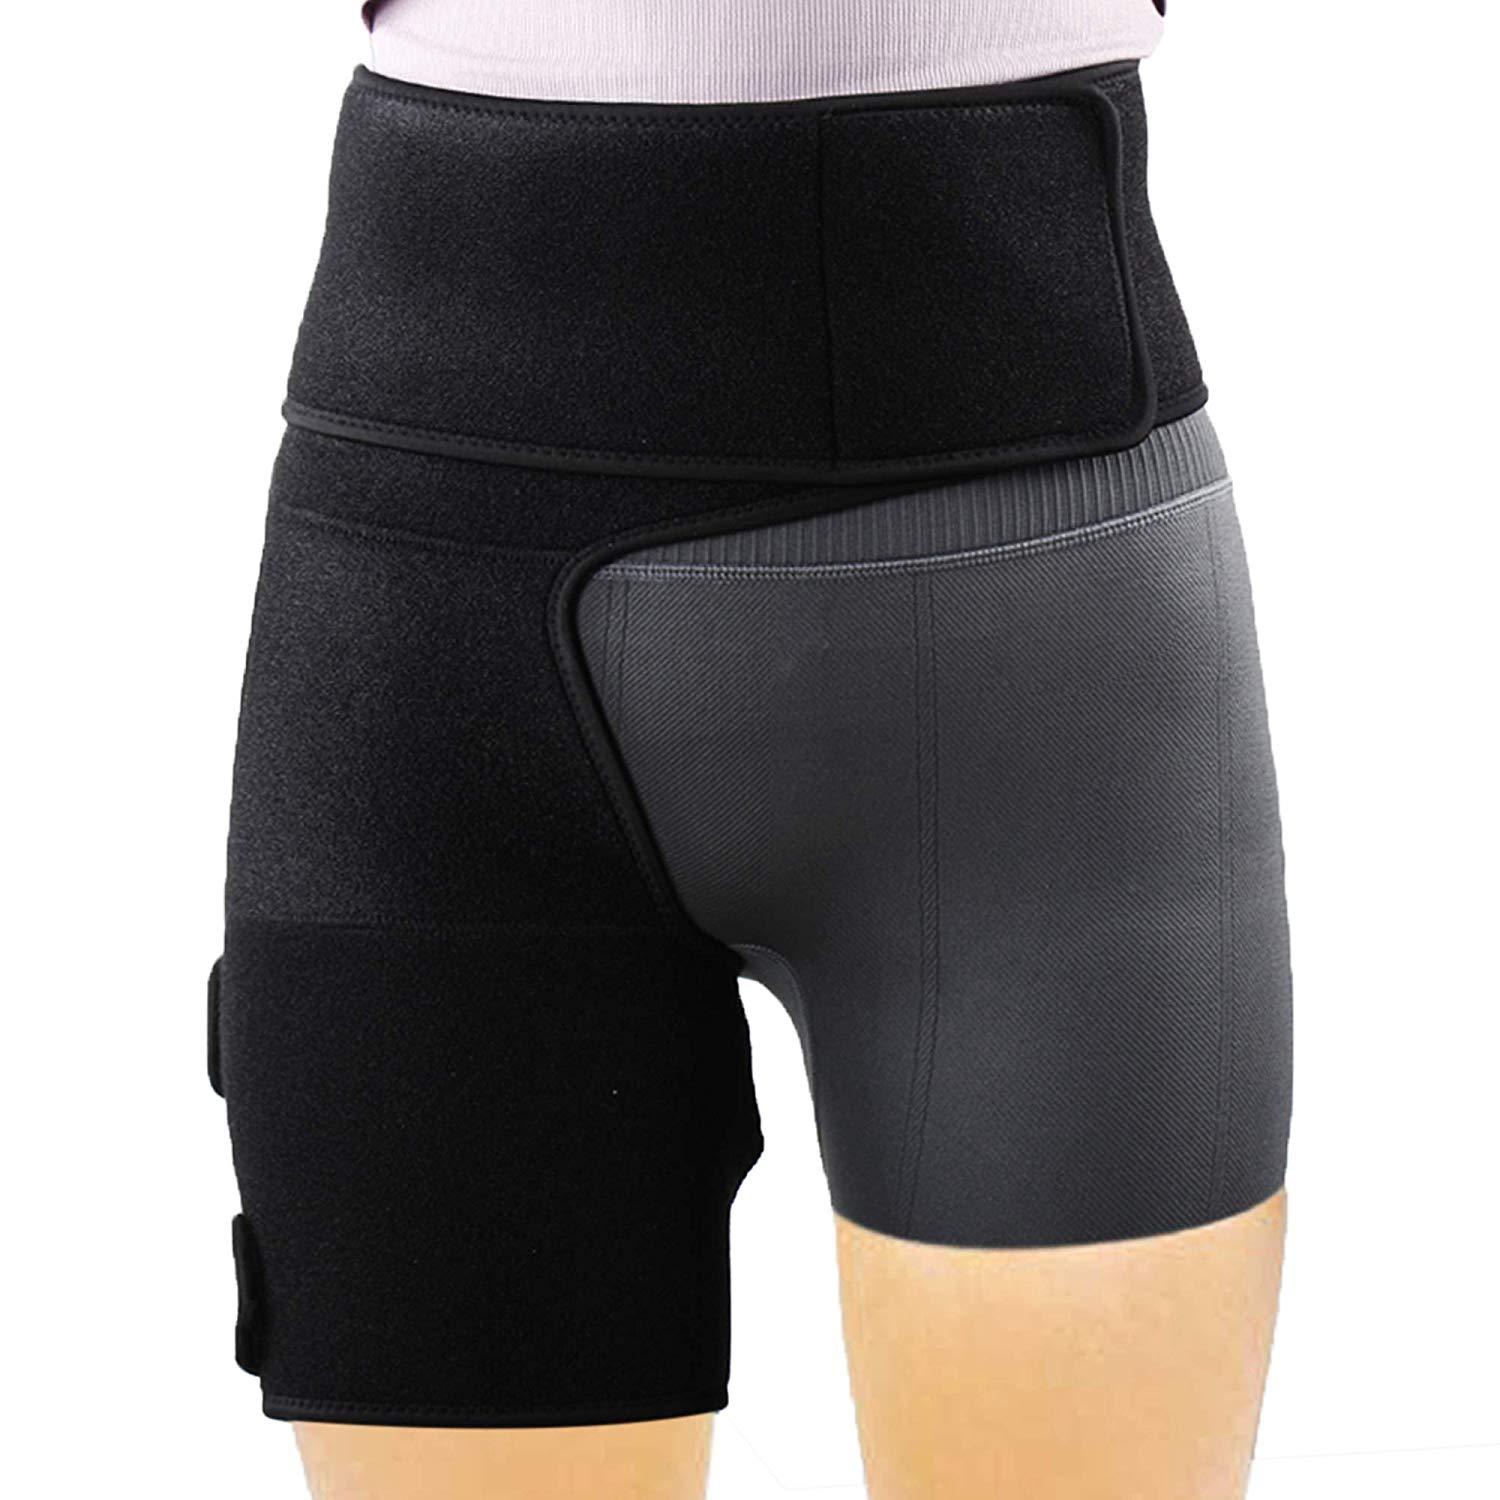 Hip Brace Thigh Hamstring Compression Sleeve Groin Hip Pain Relief